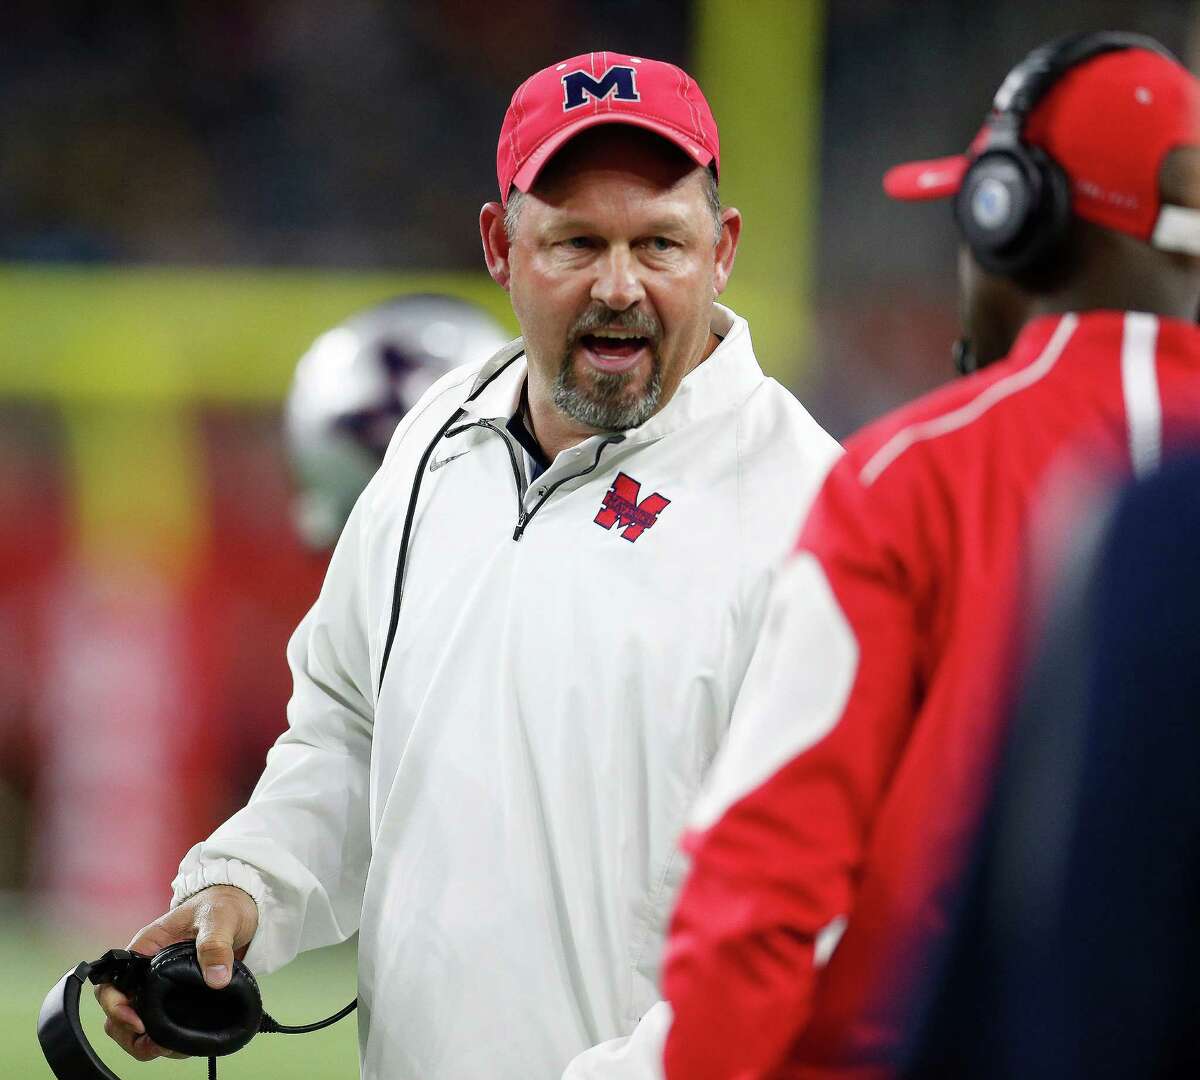 Manvel coach Kirk Martin is leaving after eight seasons to take a coaching position at a power five NCAA school.